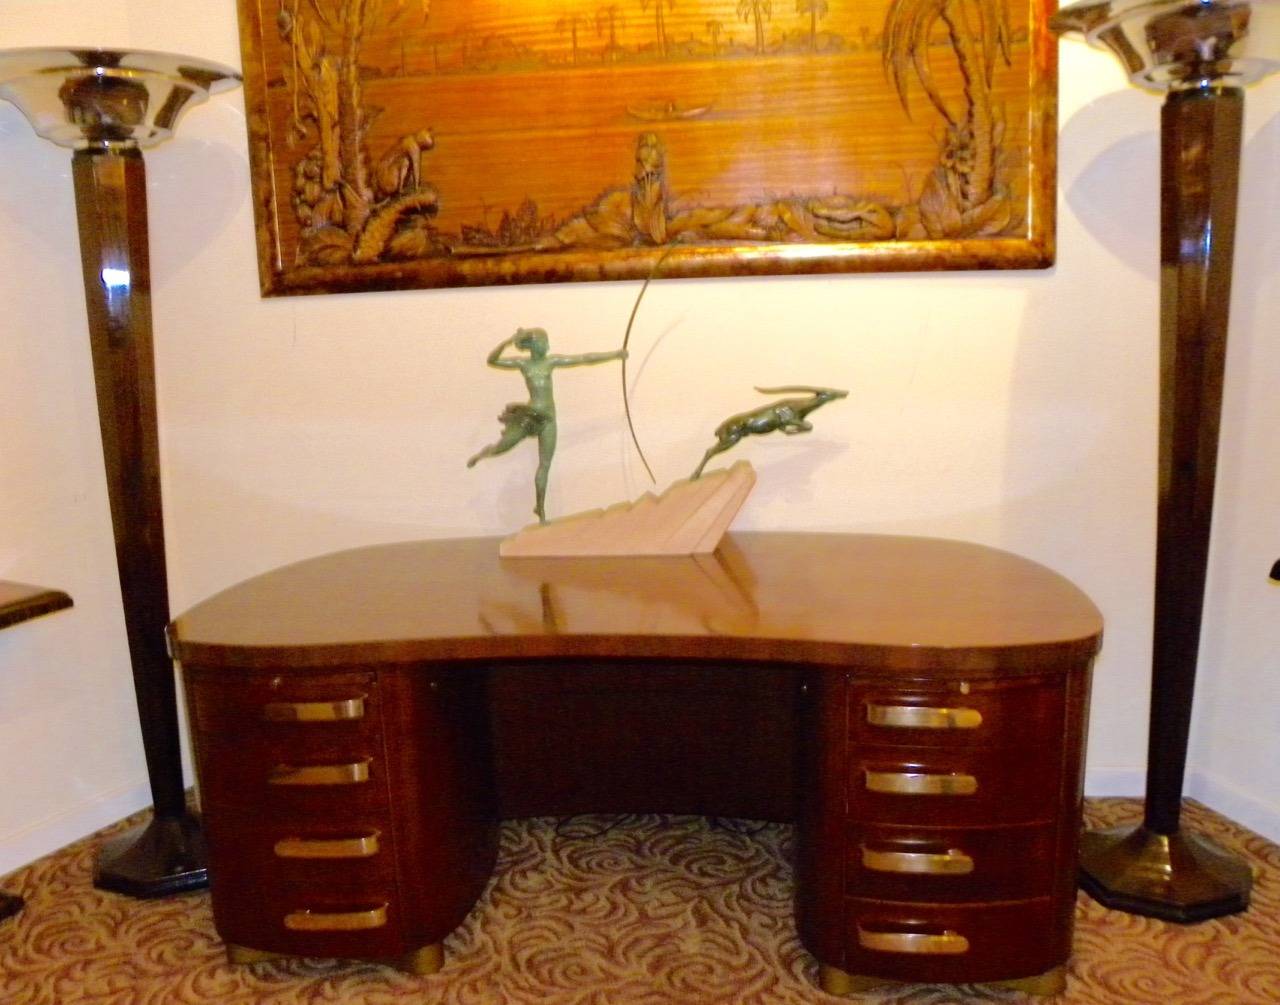 Professional Art Deco desk, extremely well made in America (Grand Rapids, Michigan). I know this desk very well as I used one just like it for about 12 years and sold it only last year after our move from SF. Luckily, we found another. Twin pedestal